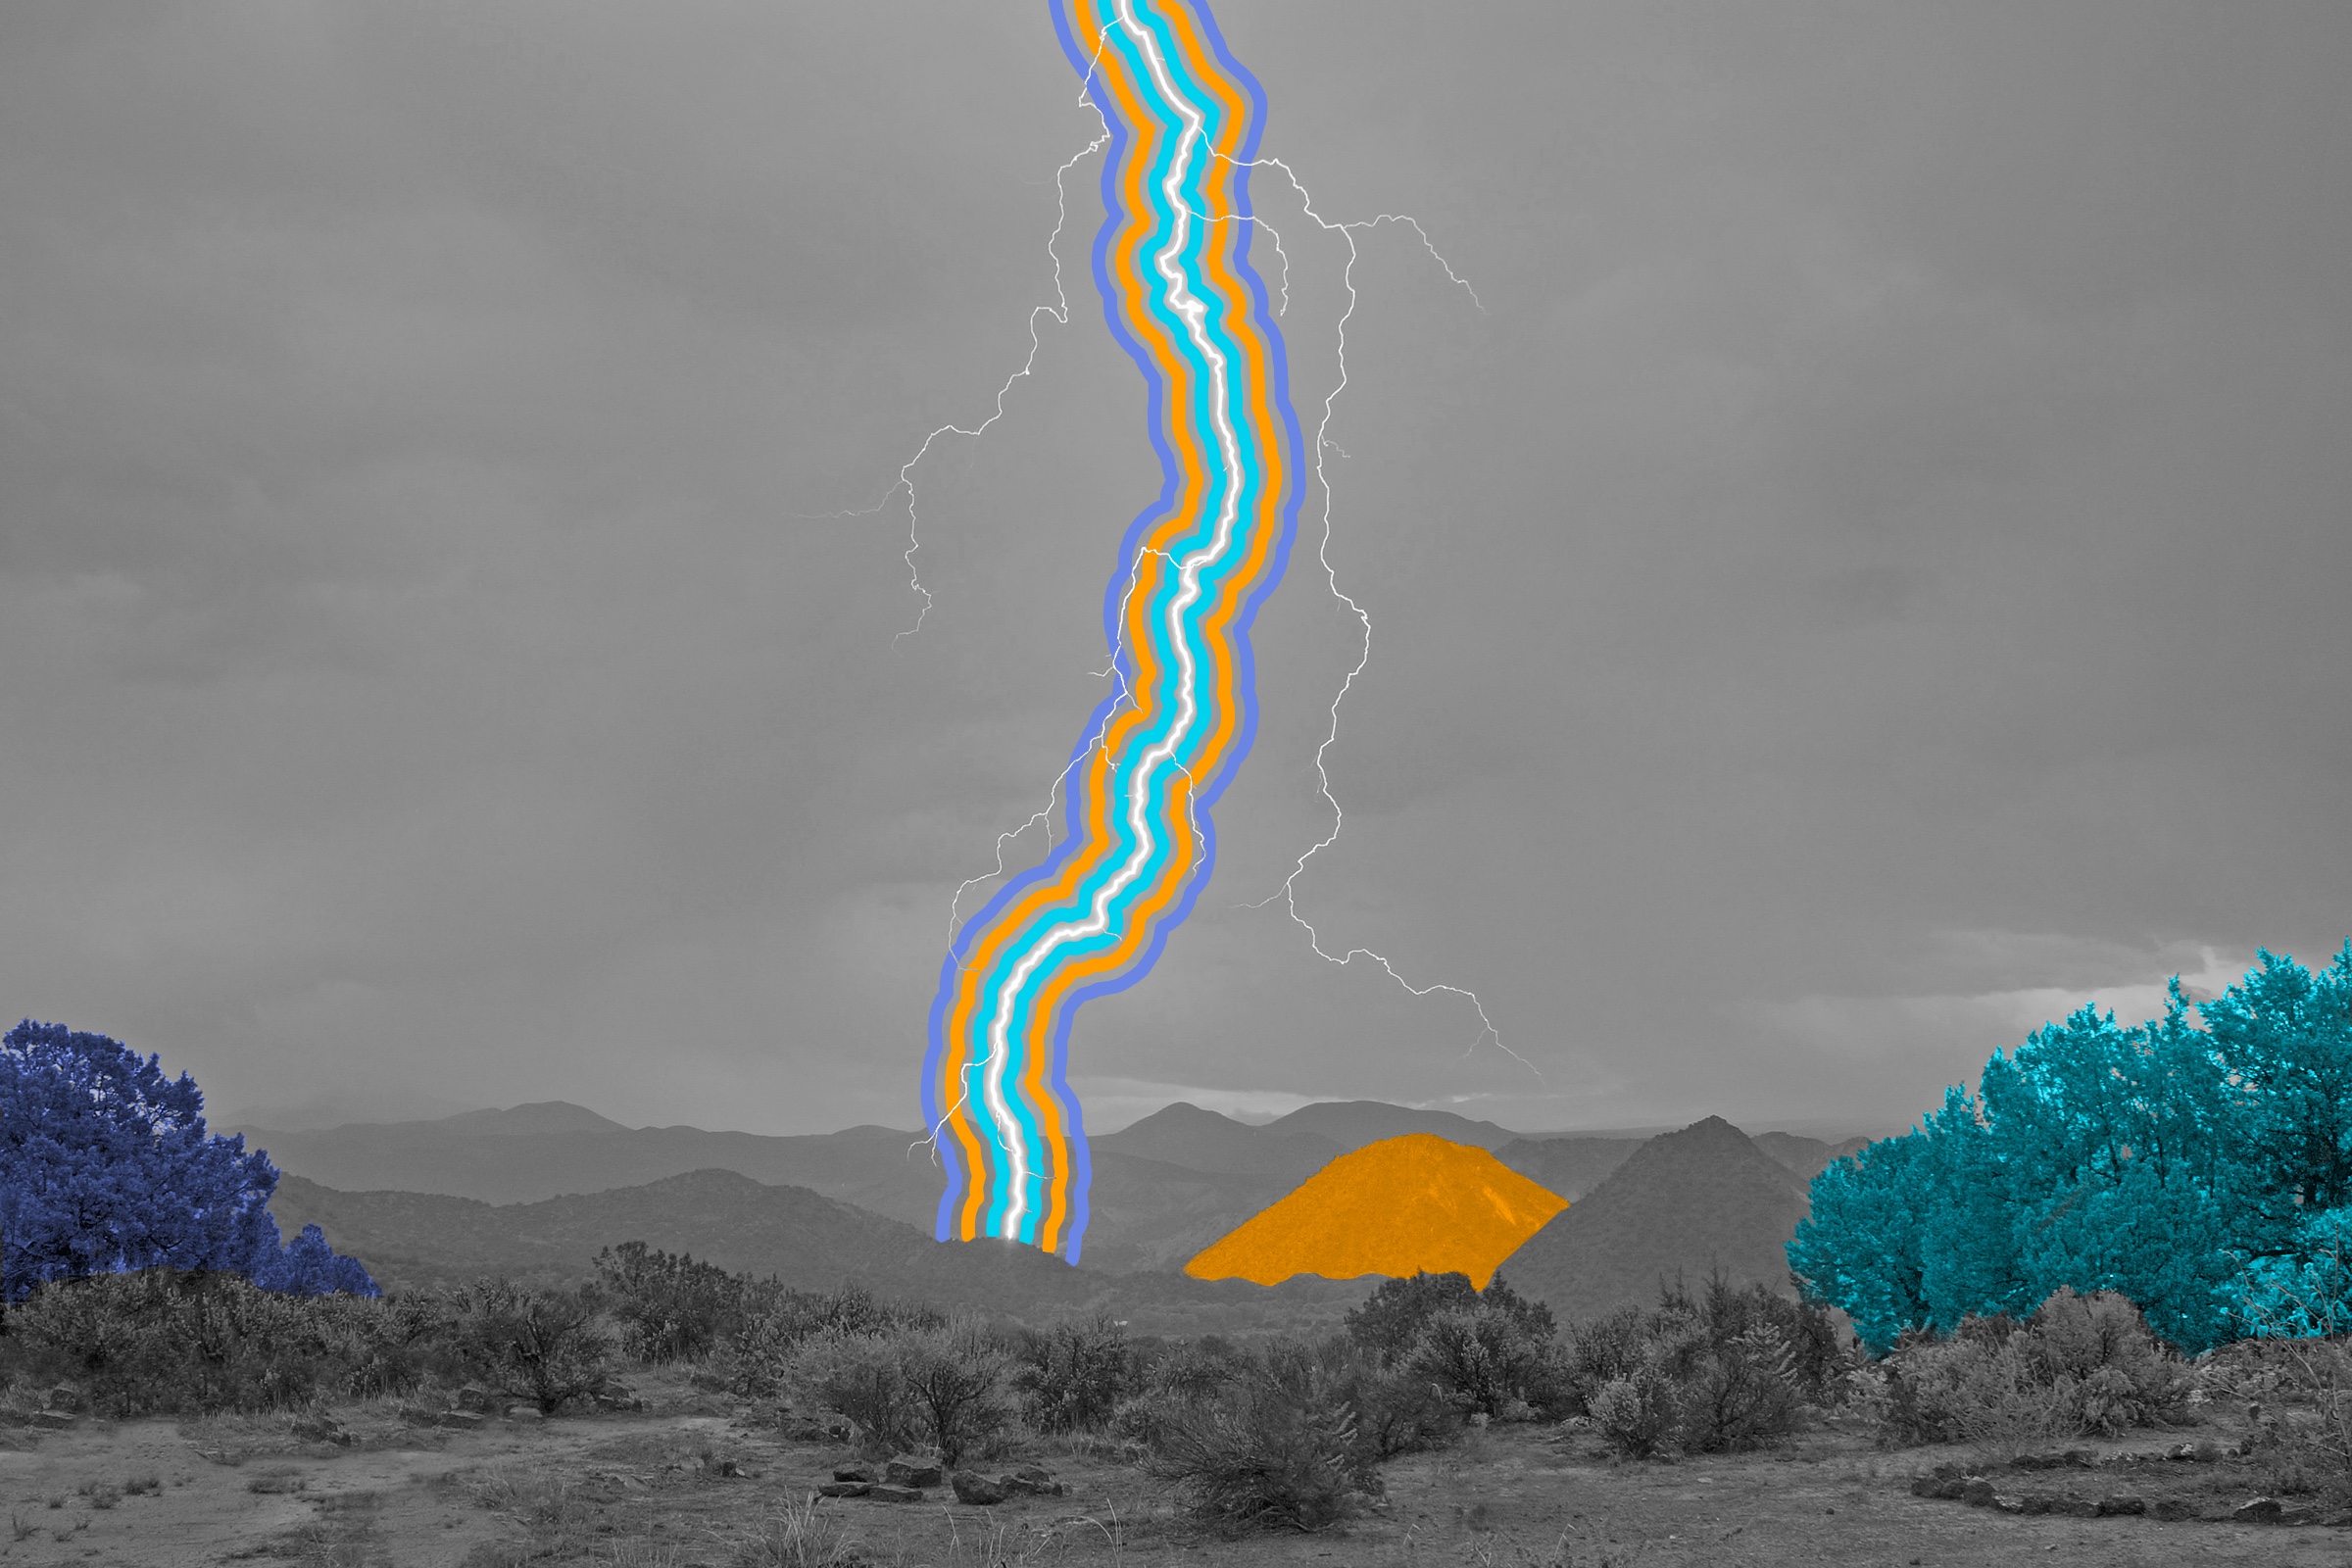 Lightning can heat the air to 50,000° F — five times hotter than the surface of the sun.